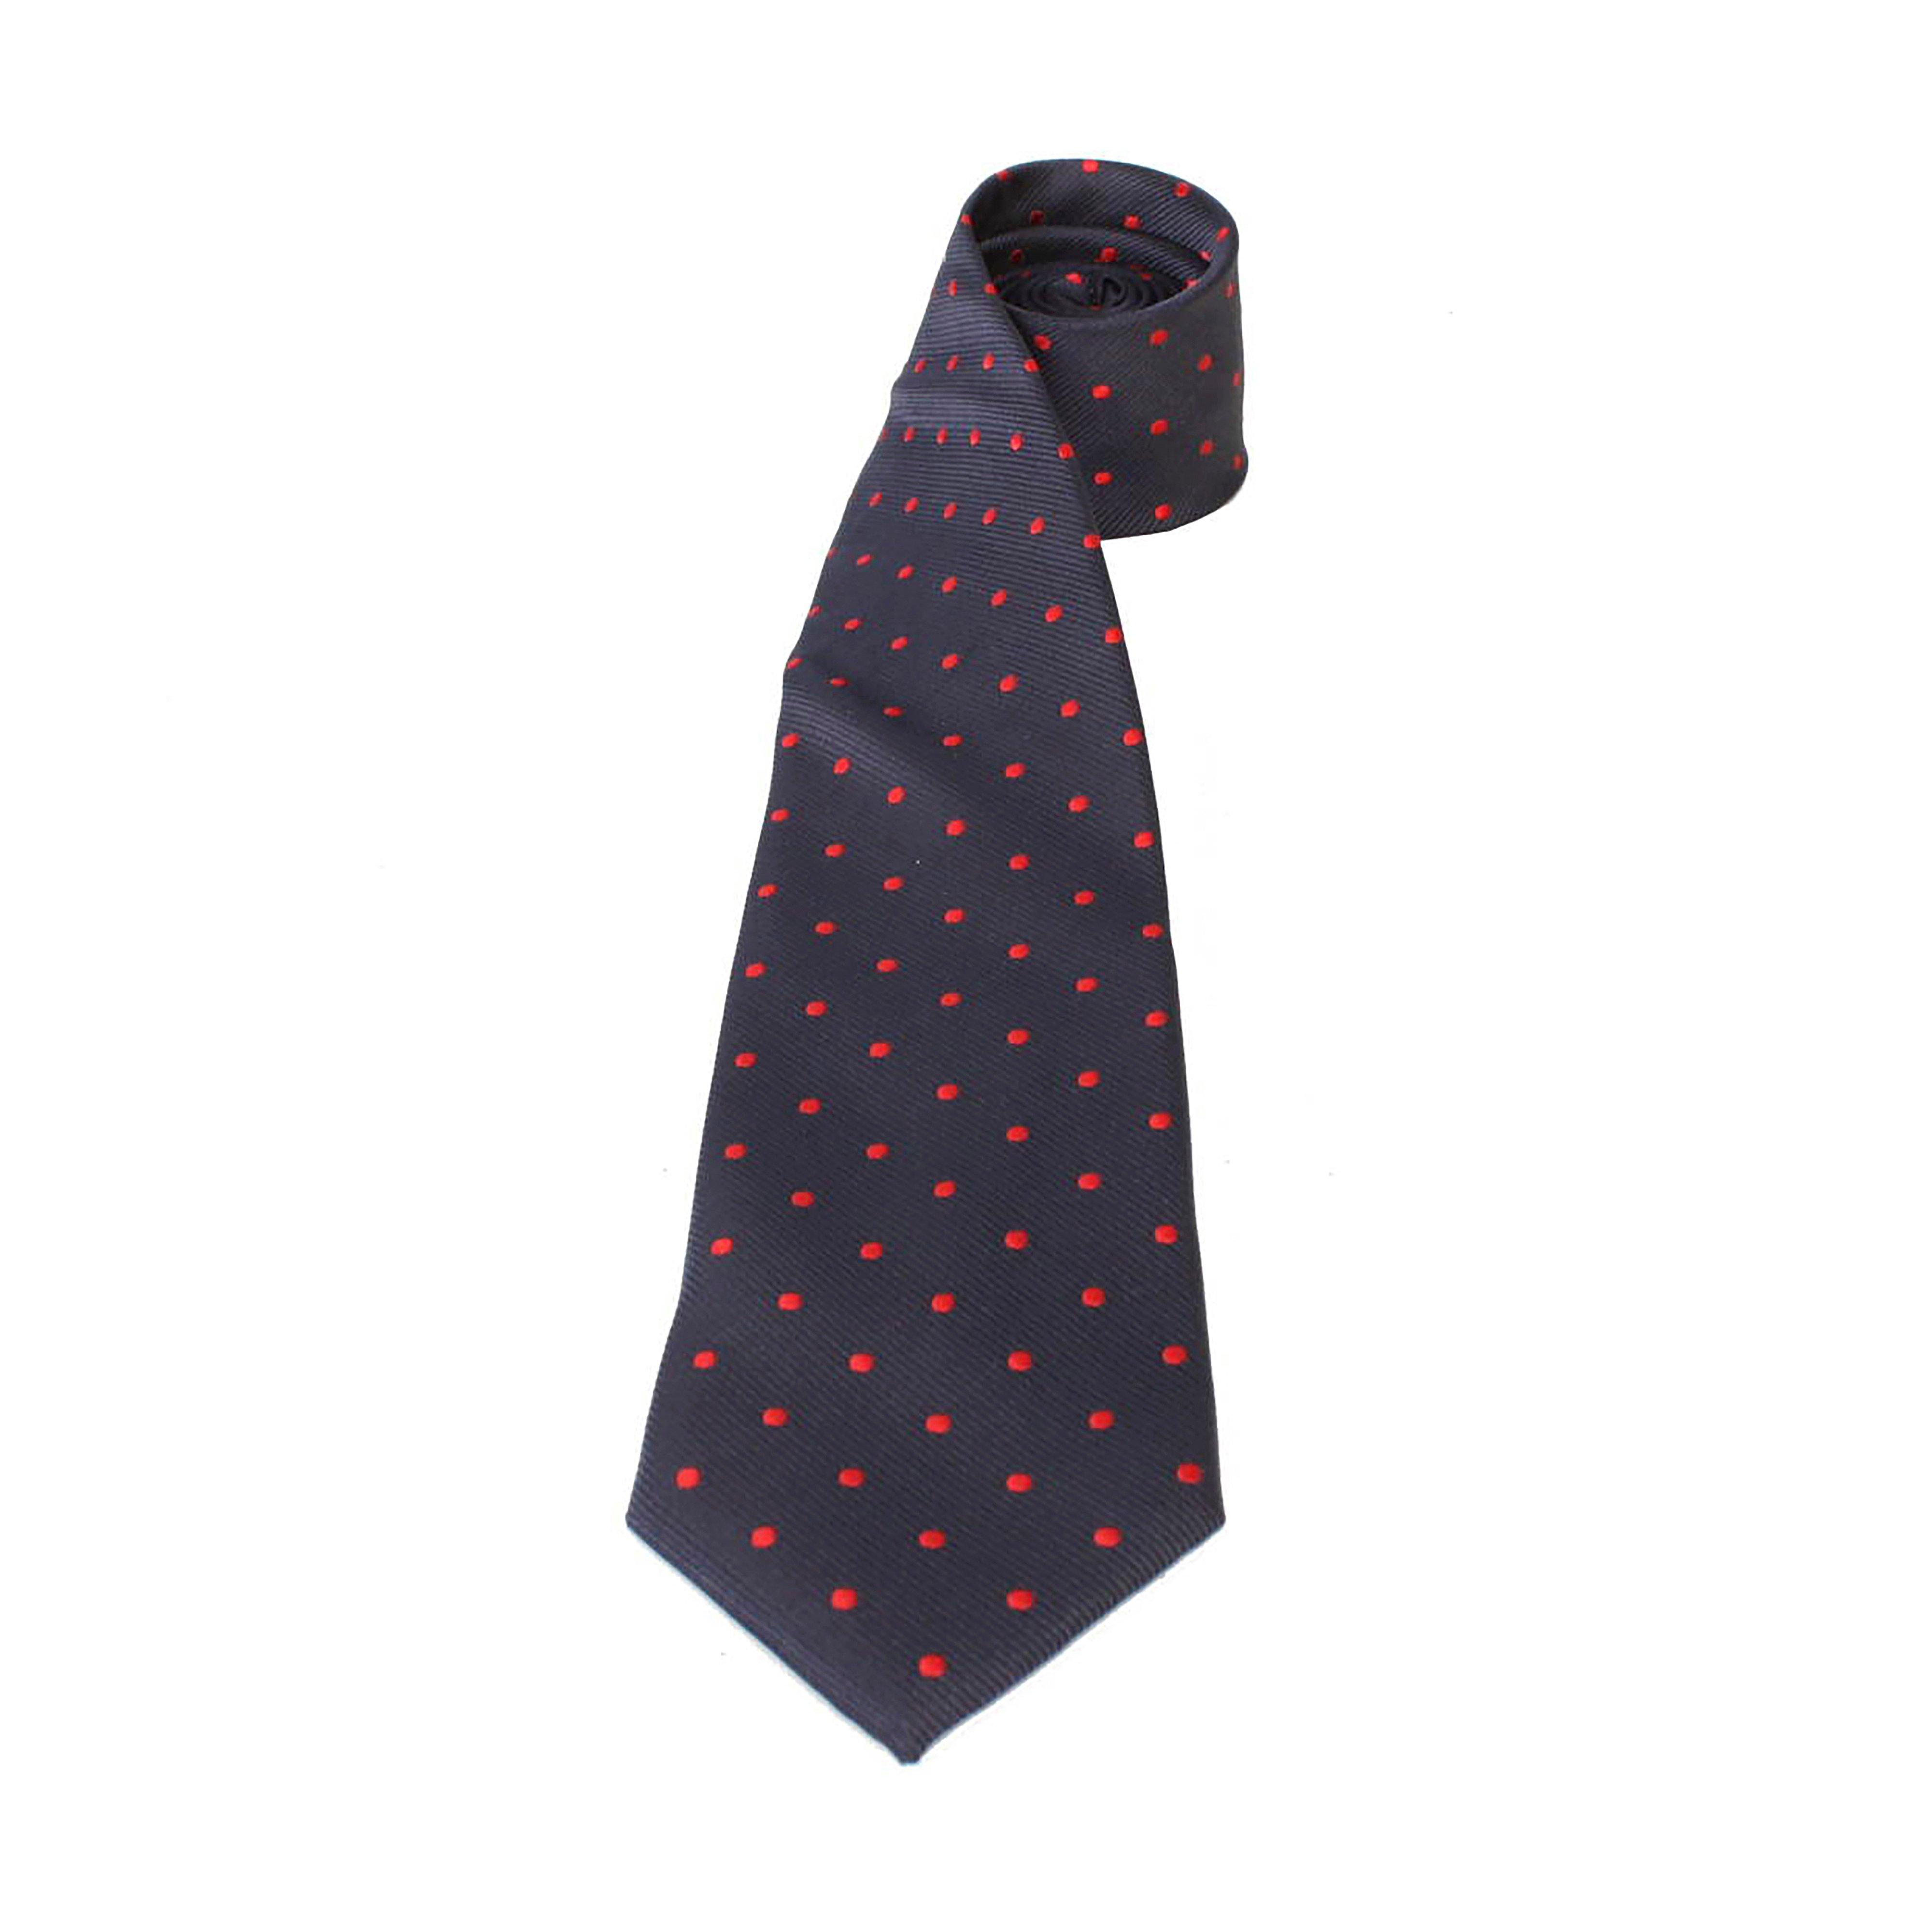 Childs Polka Dot Show Tie Navy/Red